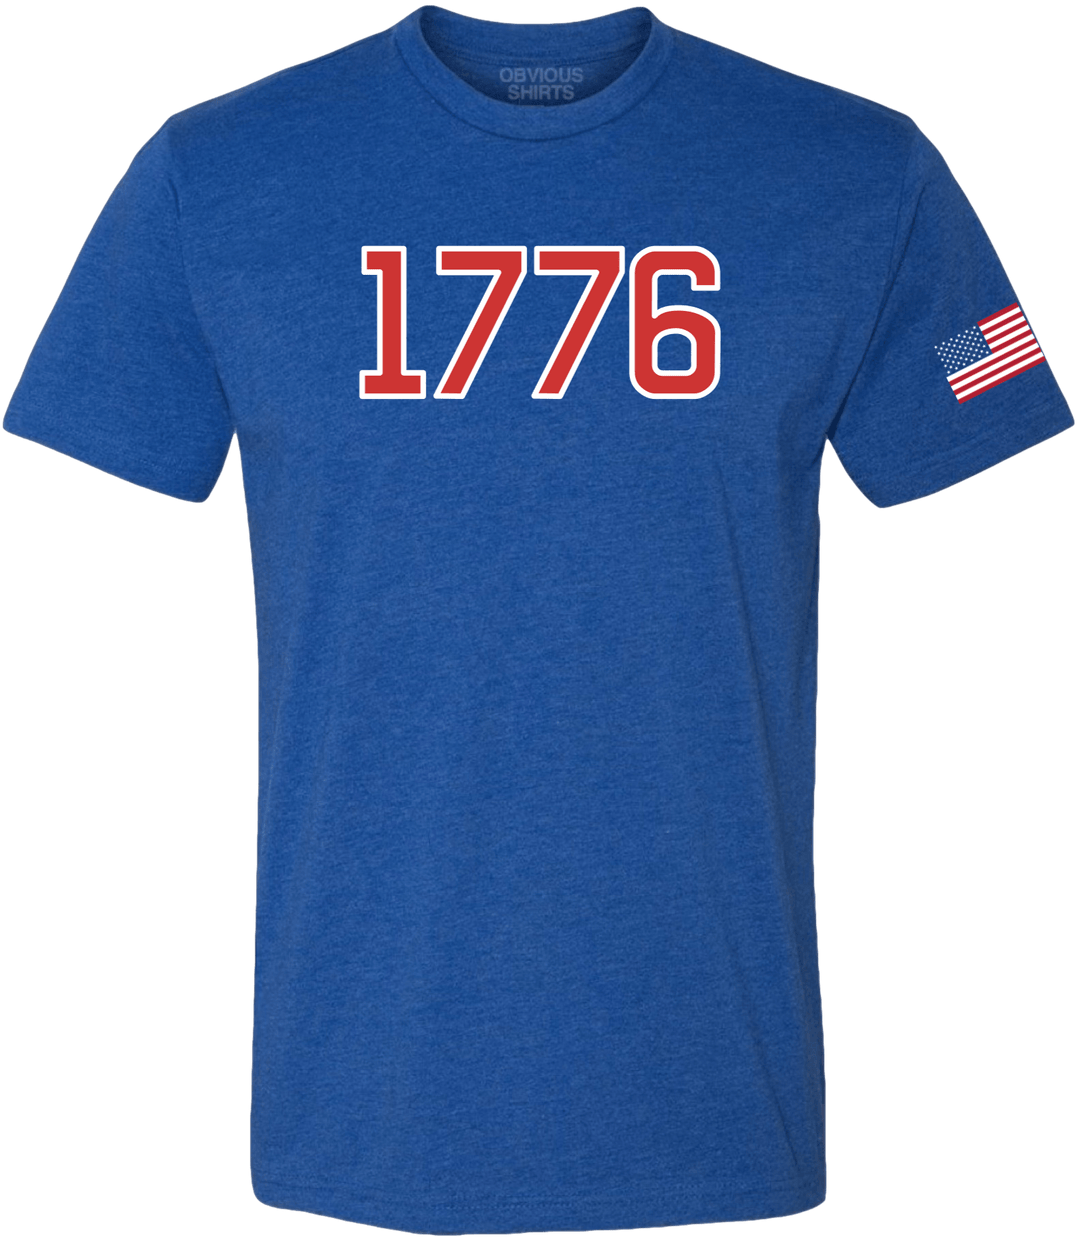 1776 - OBVIOUS SHIRTS